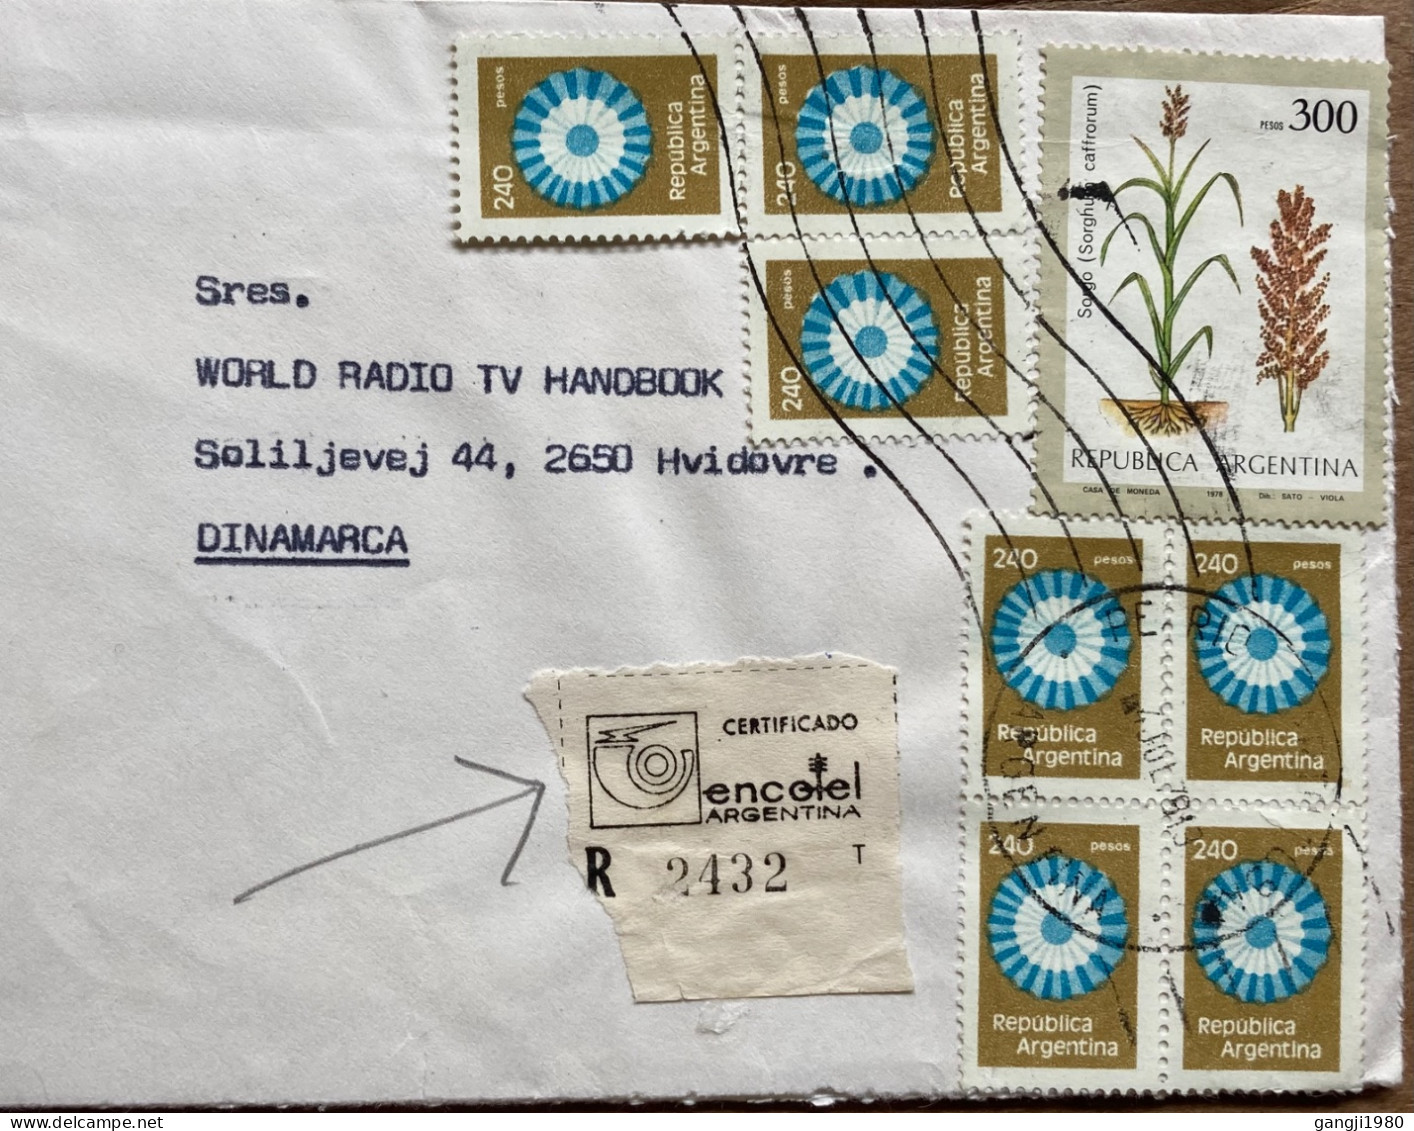 ARGENTINA-1979, COVER USED TO WORLD RADIO DENMARK, 8 STAMP GEOMATRY, ART, FLOWER PLANT, ADVERTISEMENT, RADIO RIO CUARTO. - Covers & Documents